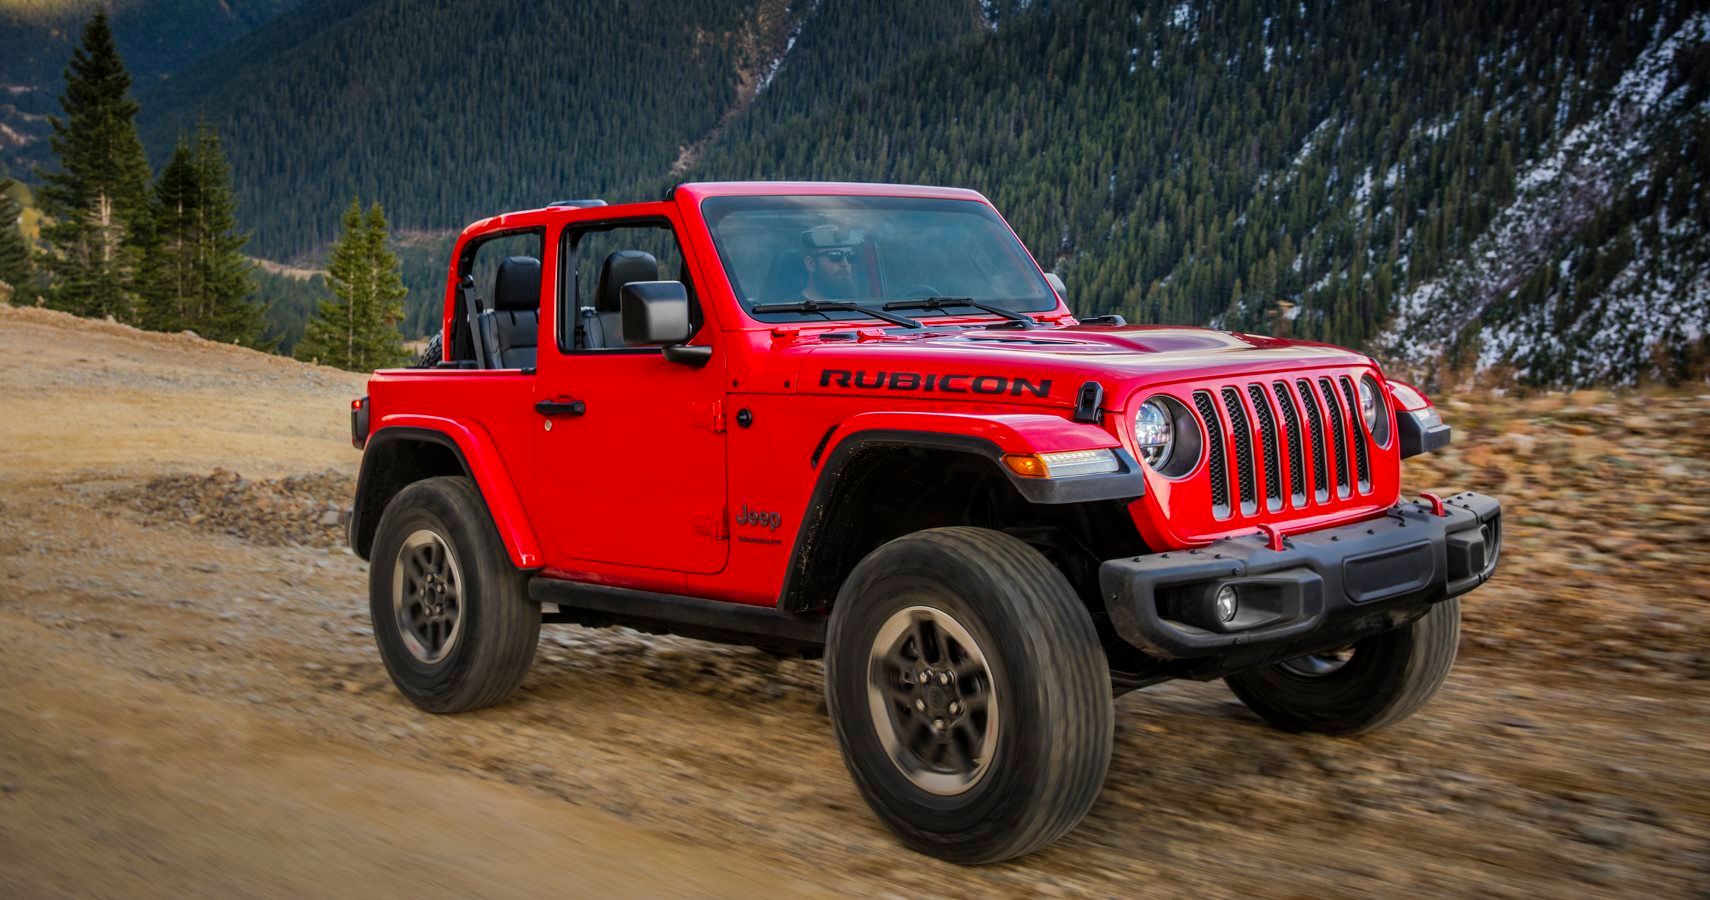 2020 Order Guide For Jeep Wrangler Reveals Big Changes On The Way